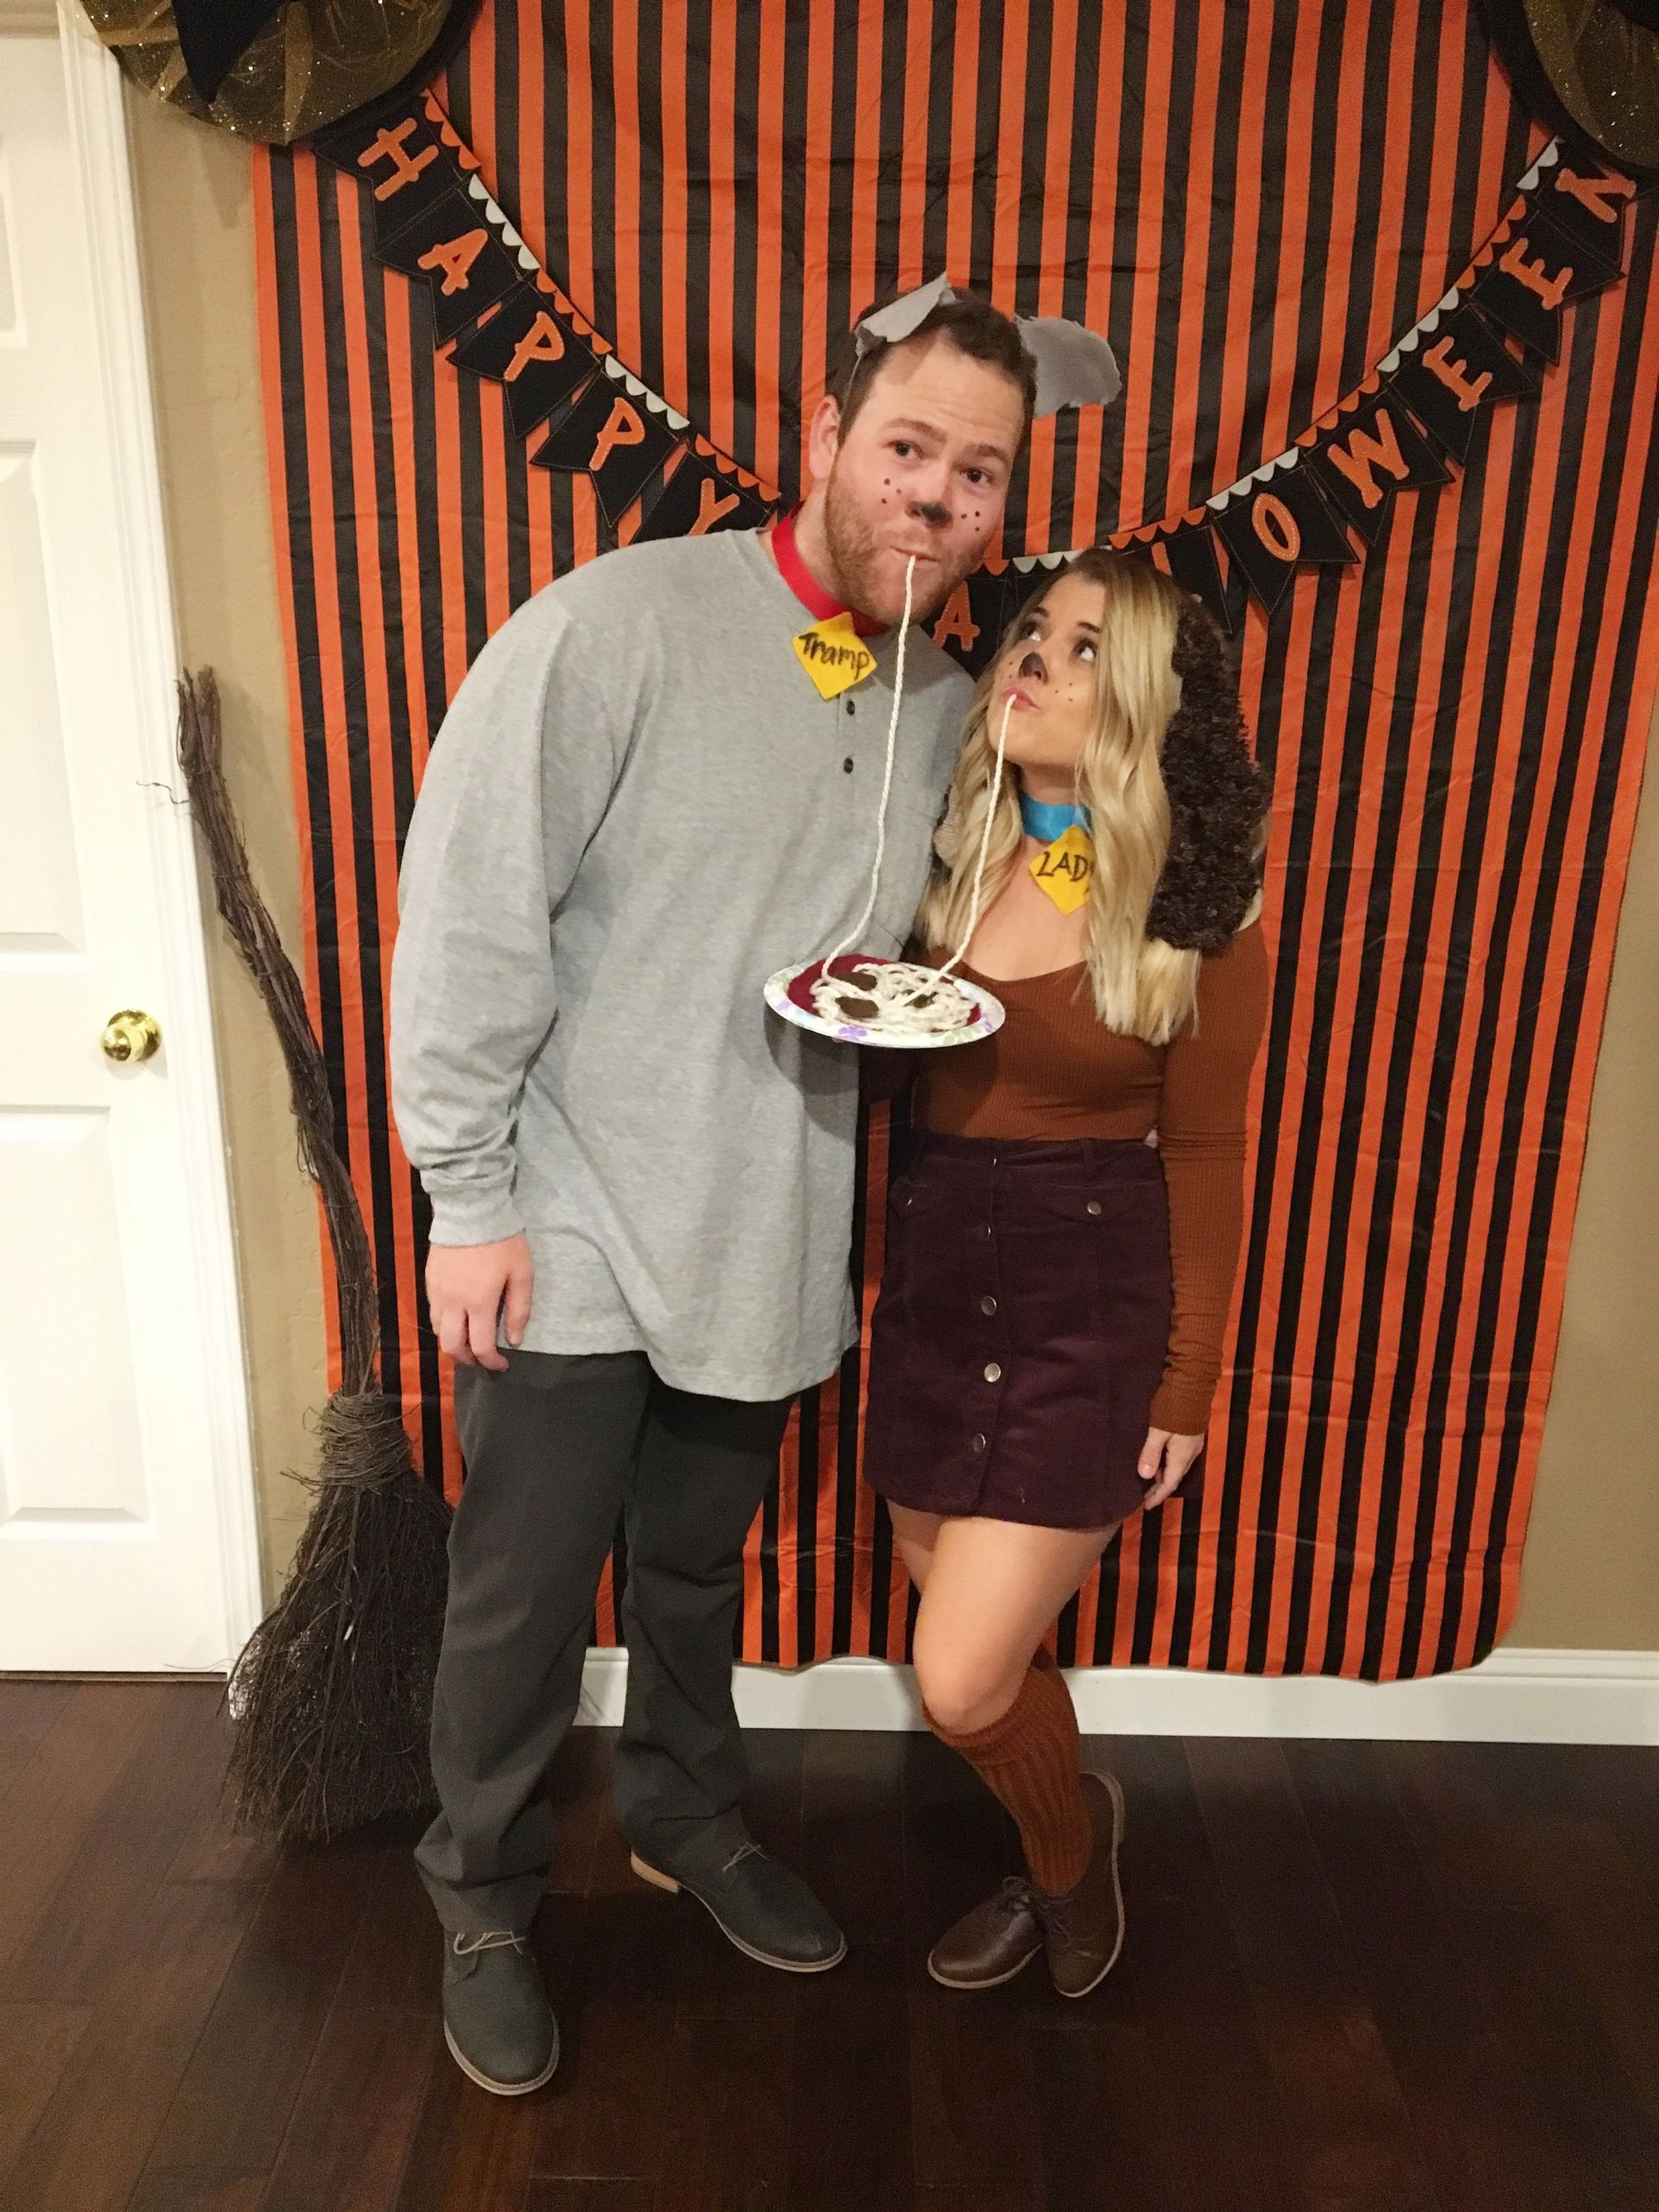 Cute Halloween Costume Ideas For Couples
 Aww how cute Lady and the Tramp couples costume